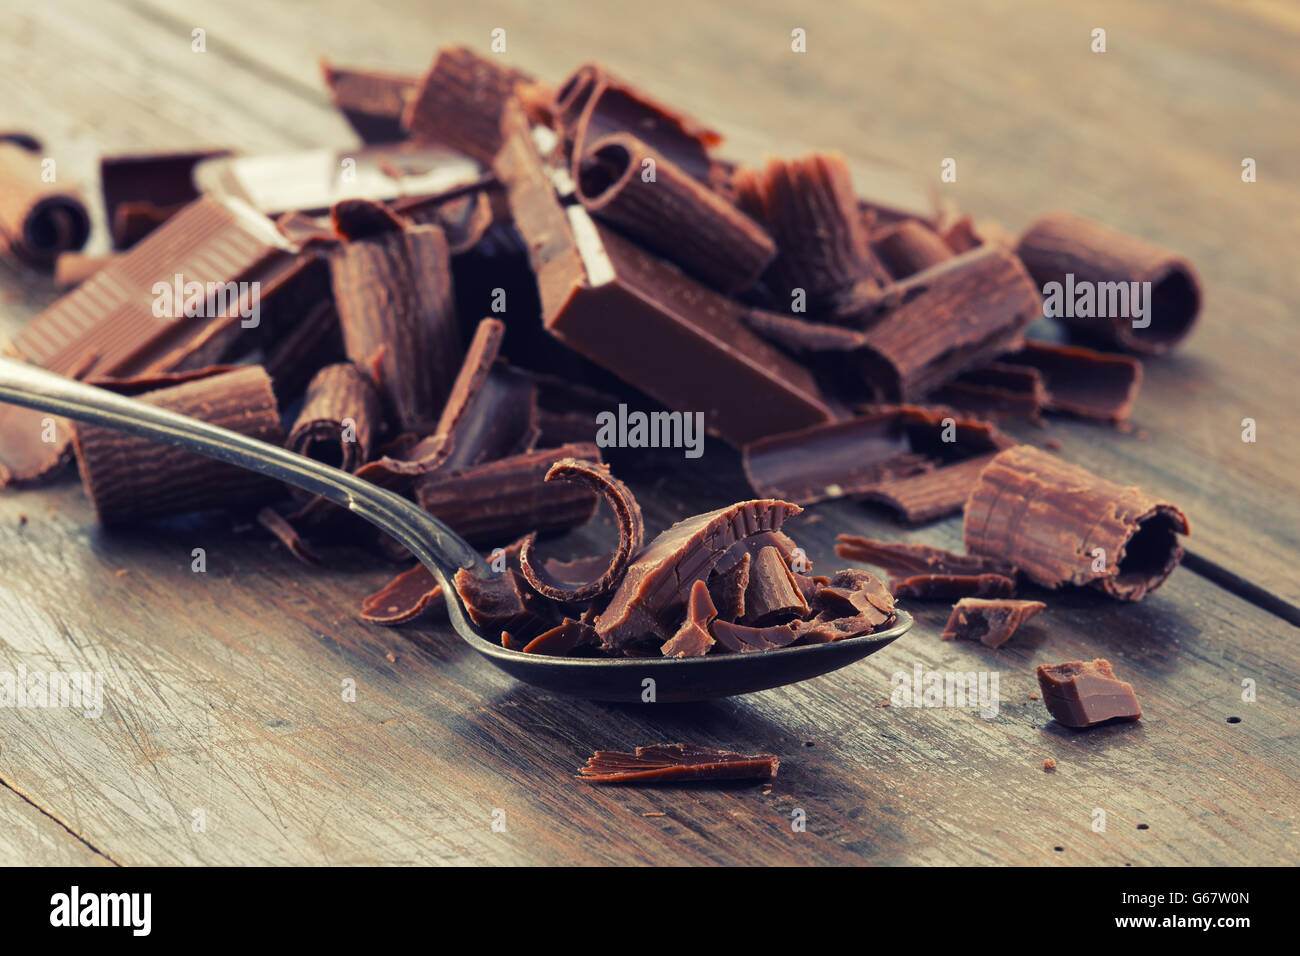 Broken dark chocolate and chocolate shavings on a wooden table Stock Photo